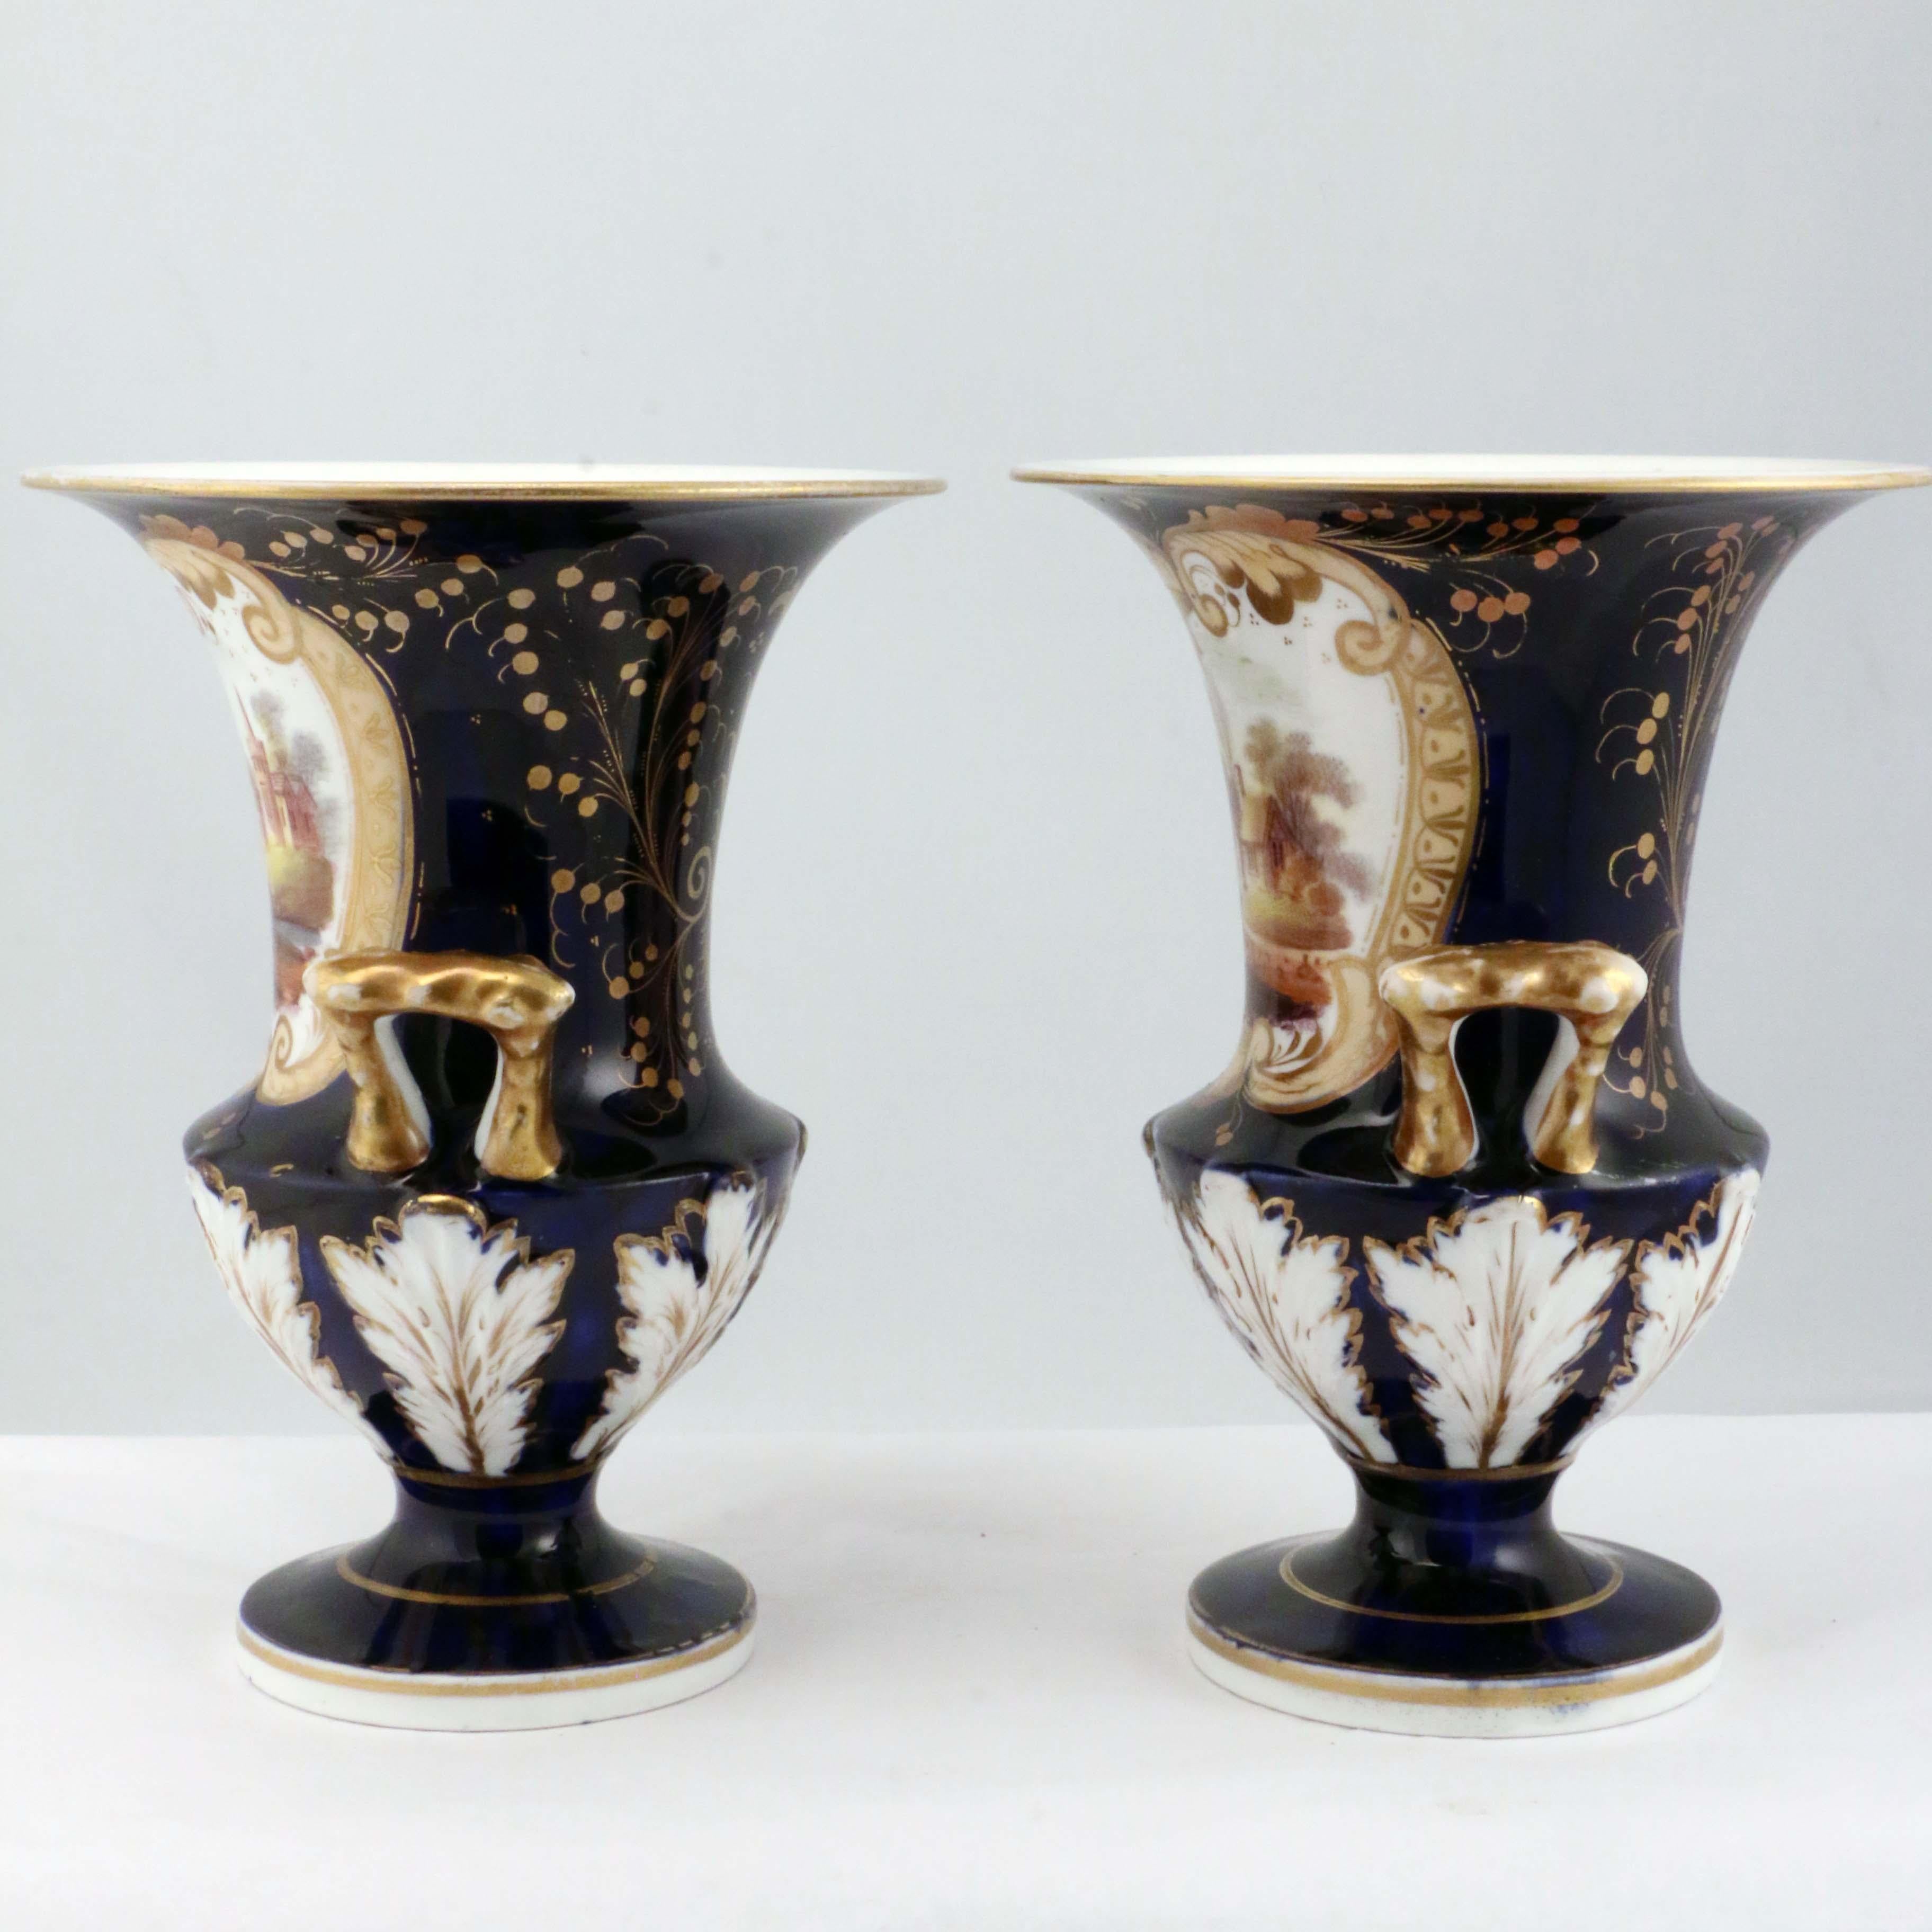 Each two handled urn is painted with a romantic view, one a castle, the other a country cottage, within a shaped gilt and yellow border. on a molded and cobalt-blue ground. The back is gilt with a stylized design, the base is molded with